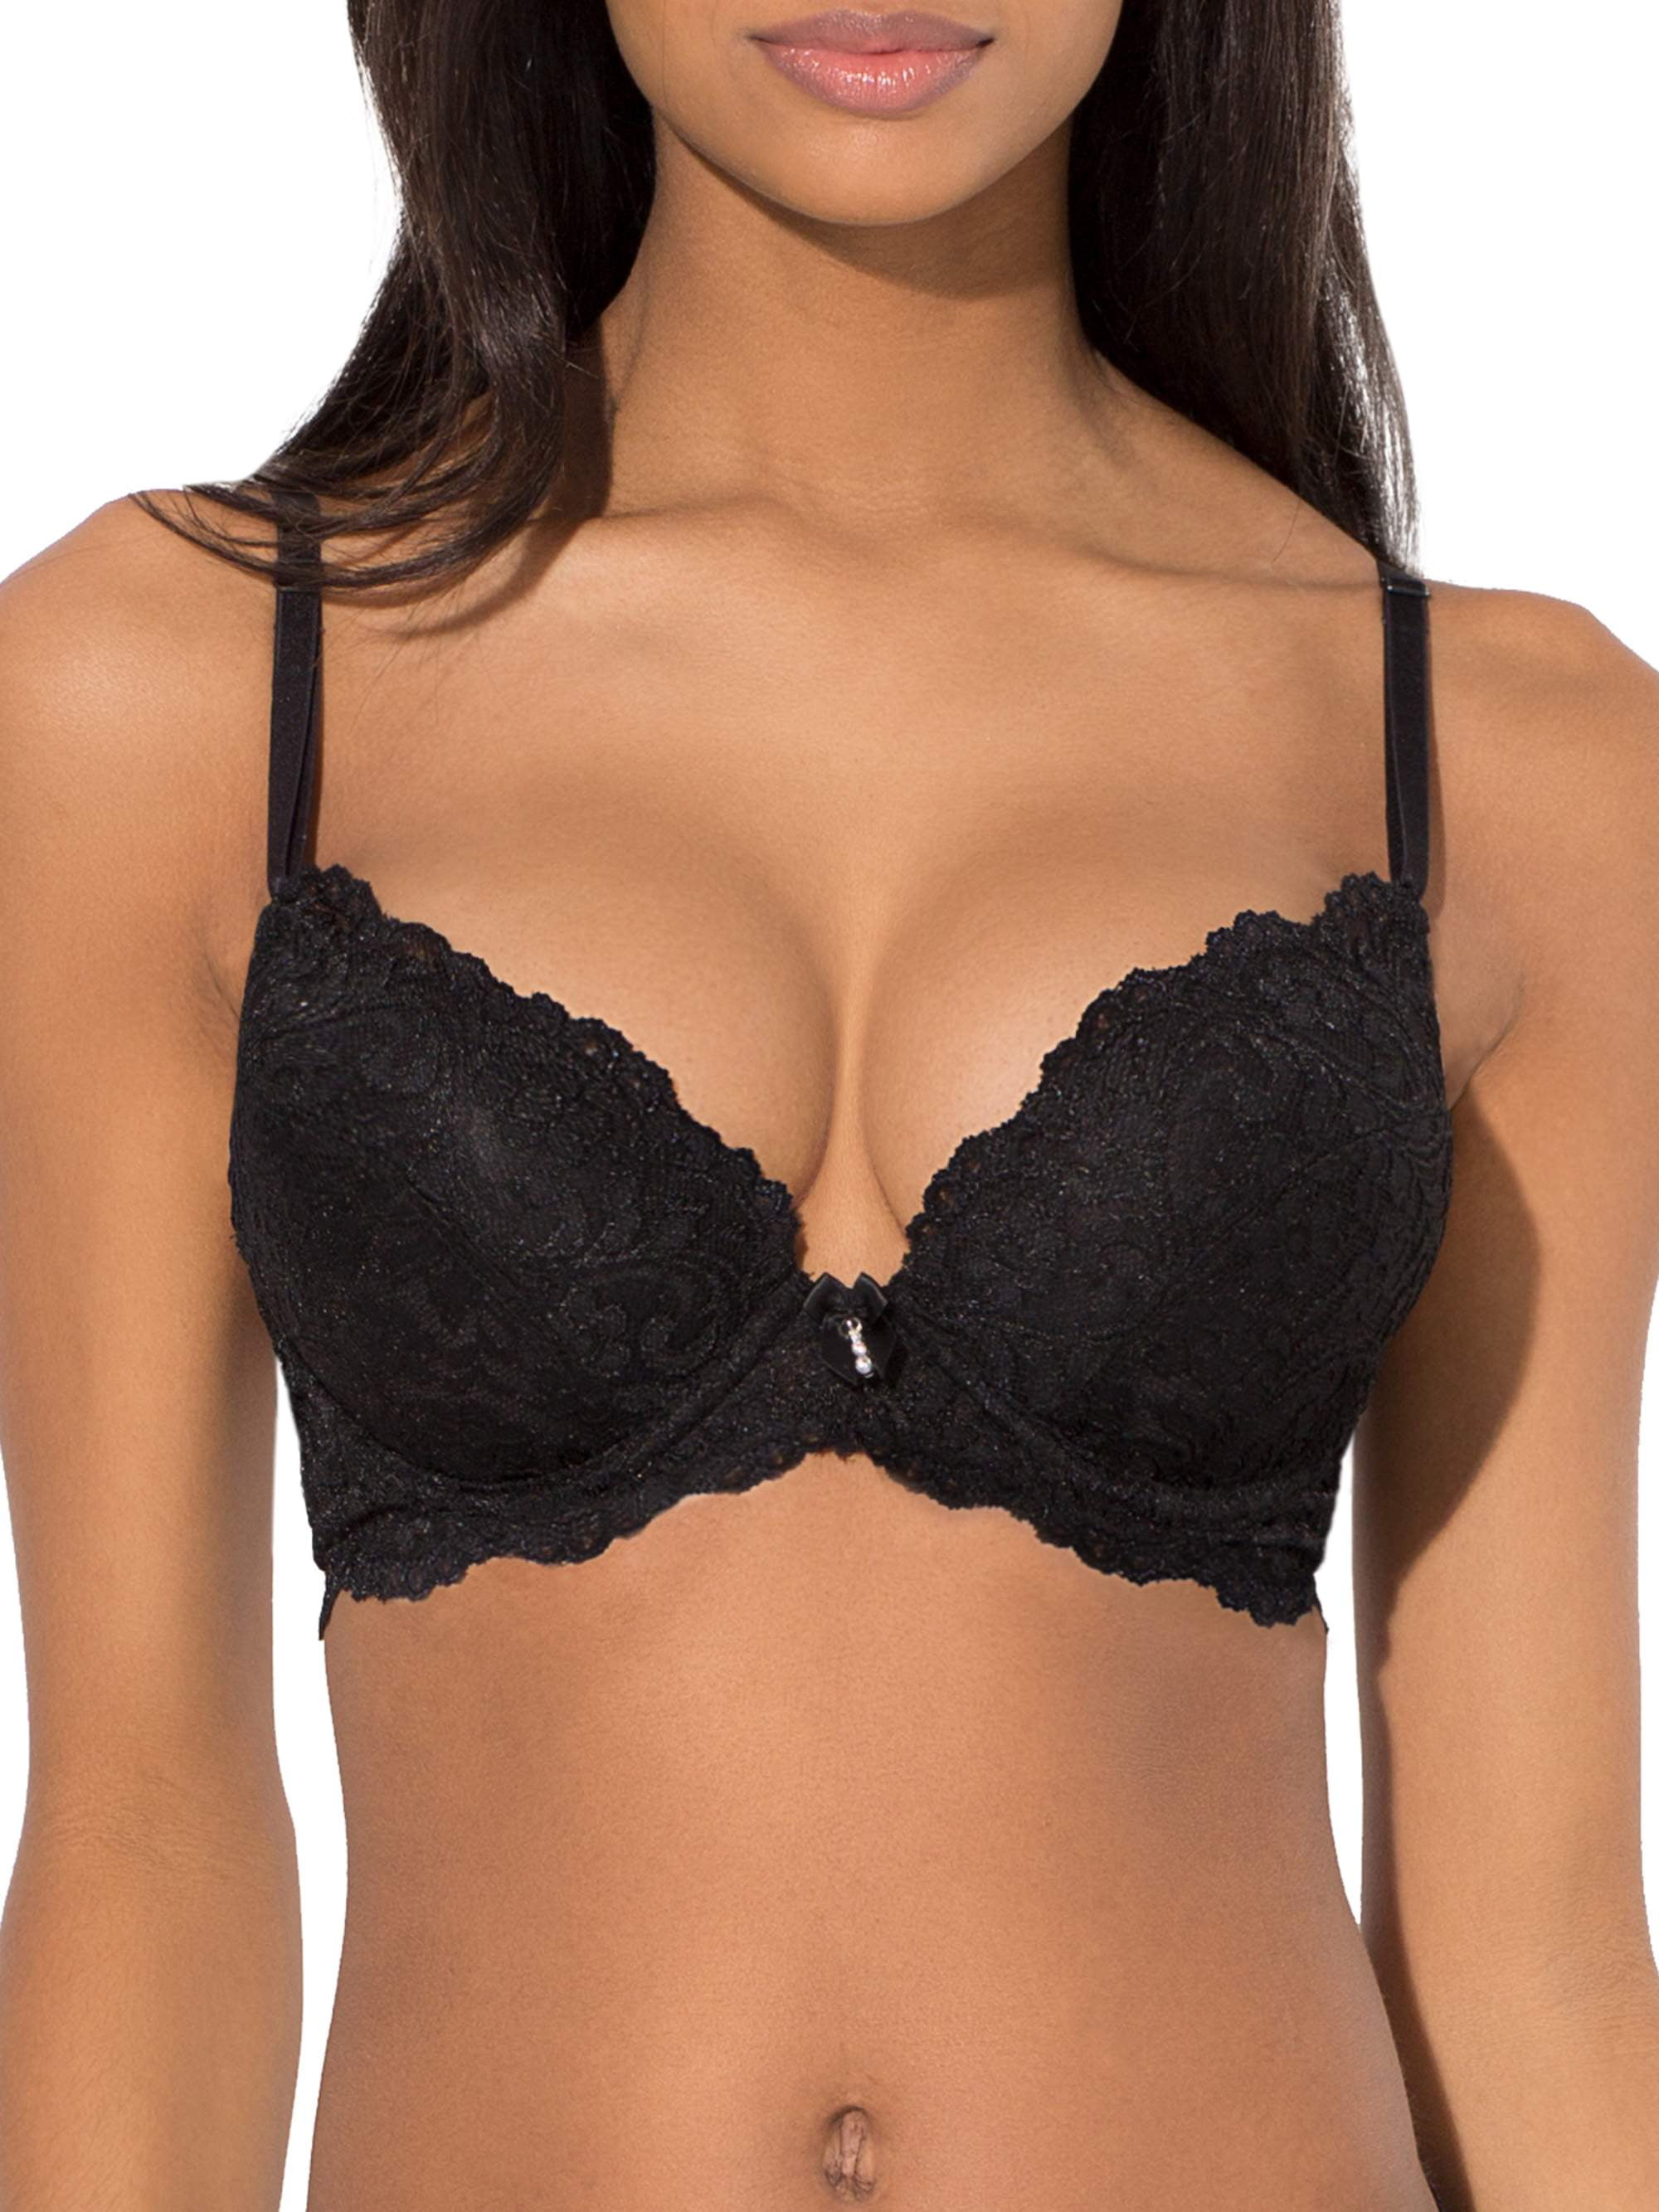 Victoria's Secret Bombshell Sexy Strap Push Up Bra, Add 2 Cups, Plunge  Neckline, Bras for Women, Very Sexy Collection, Black (32A) at   Women's Clothing store